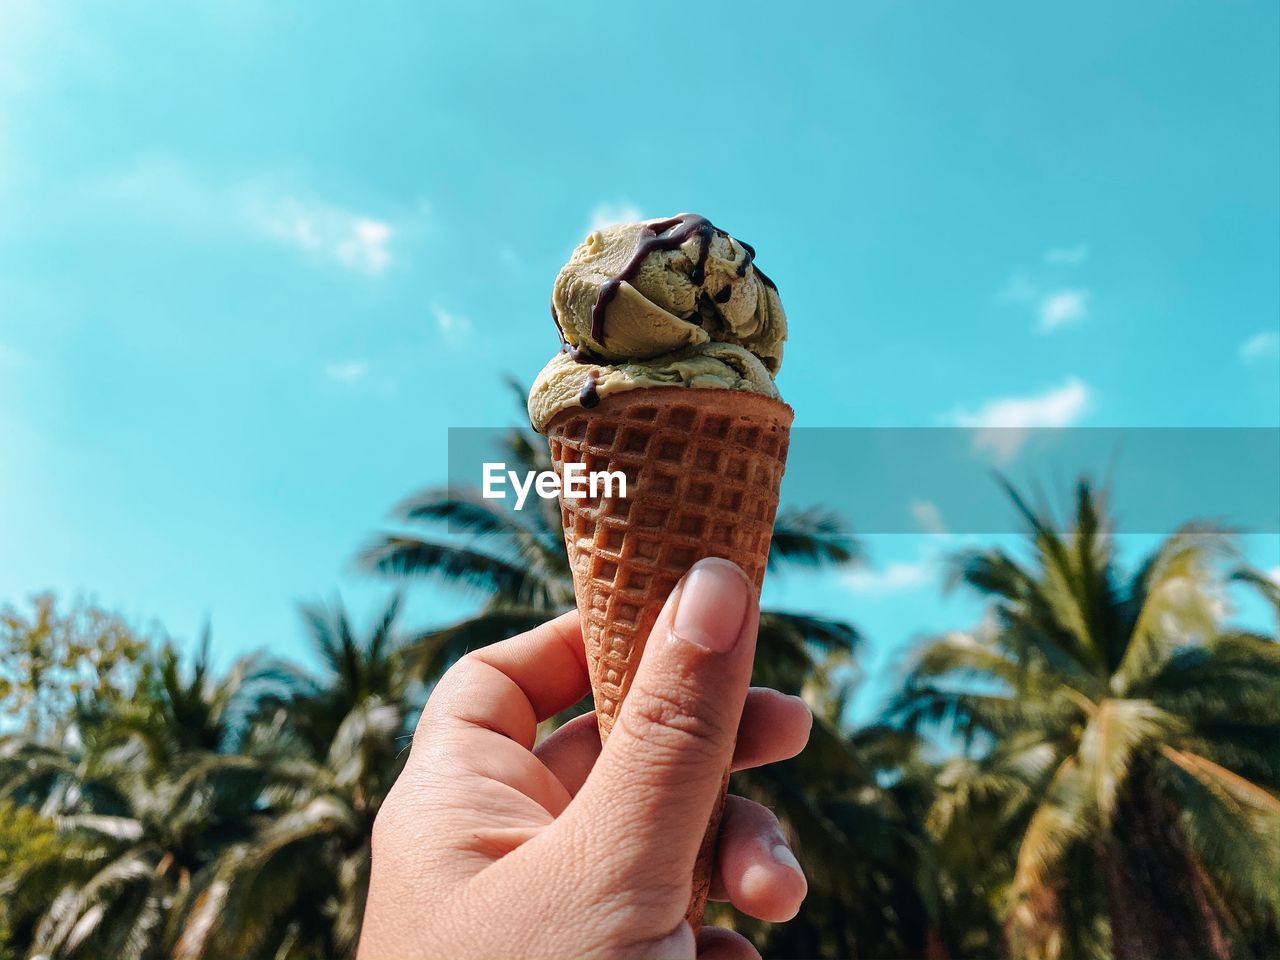 HUMAN HAND HOLDING ICE CREAM CONE AGAINST SKY